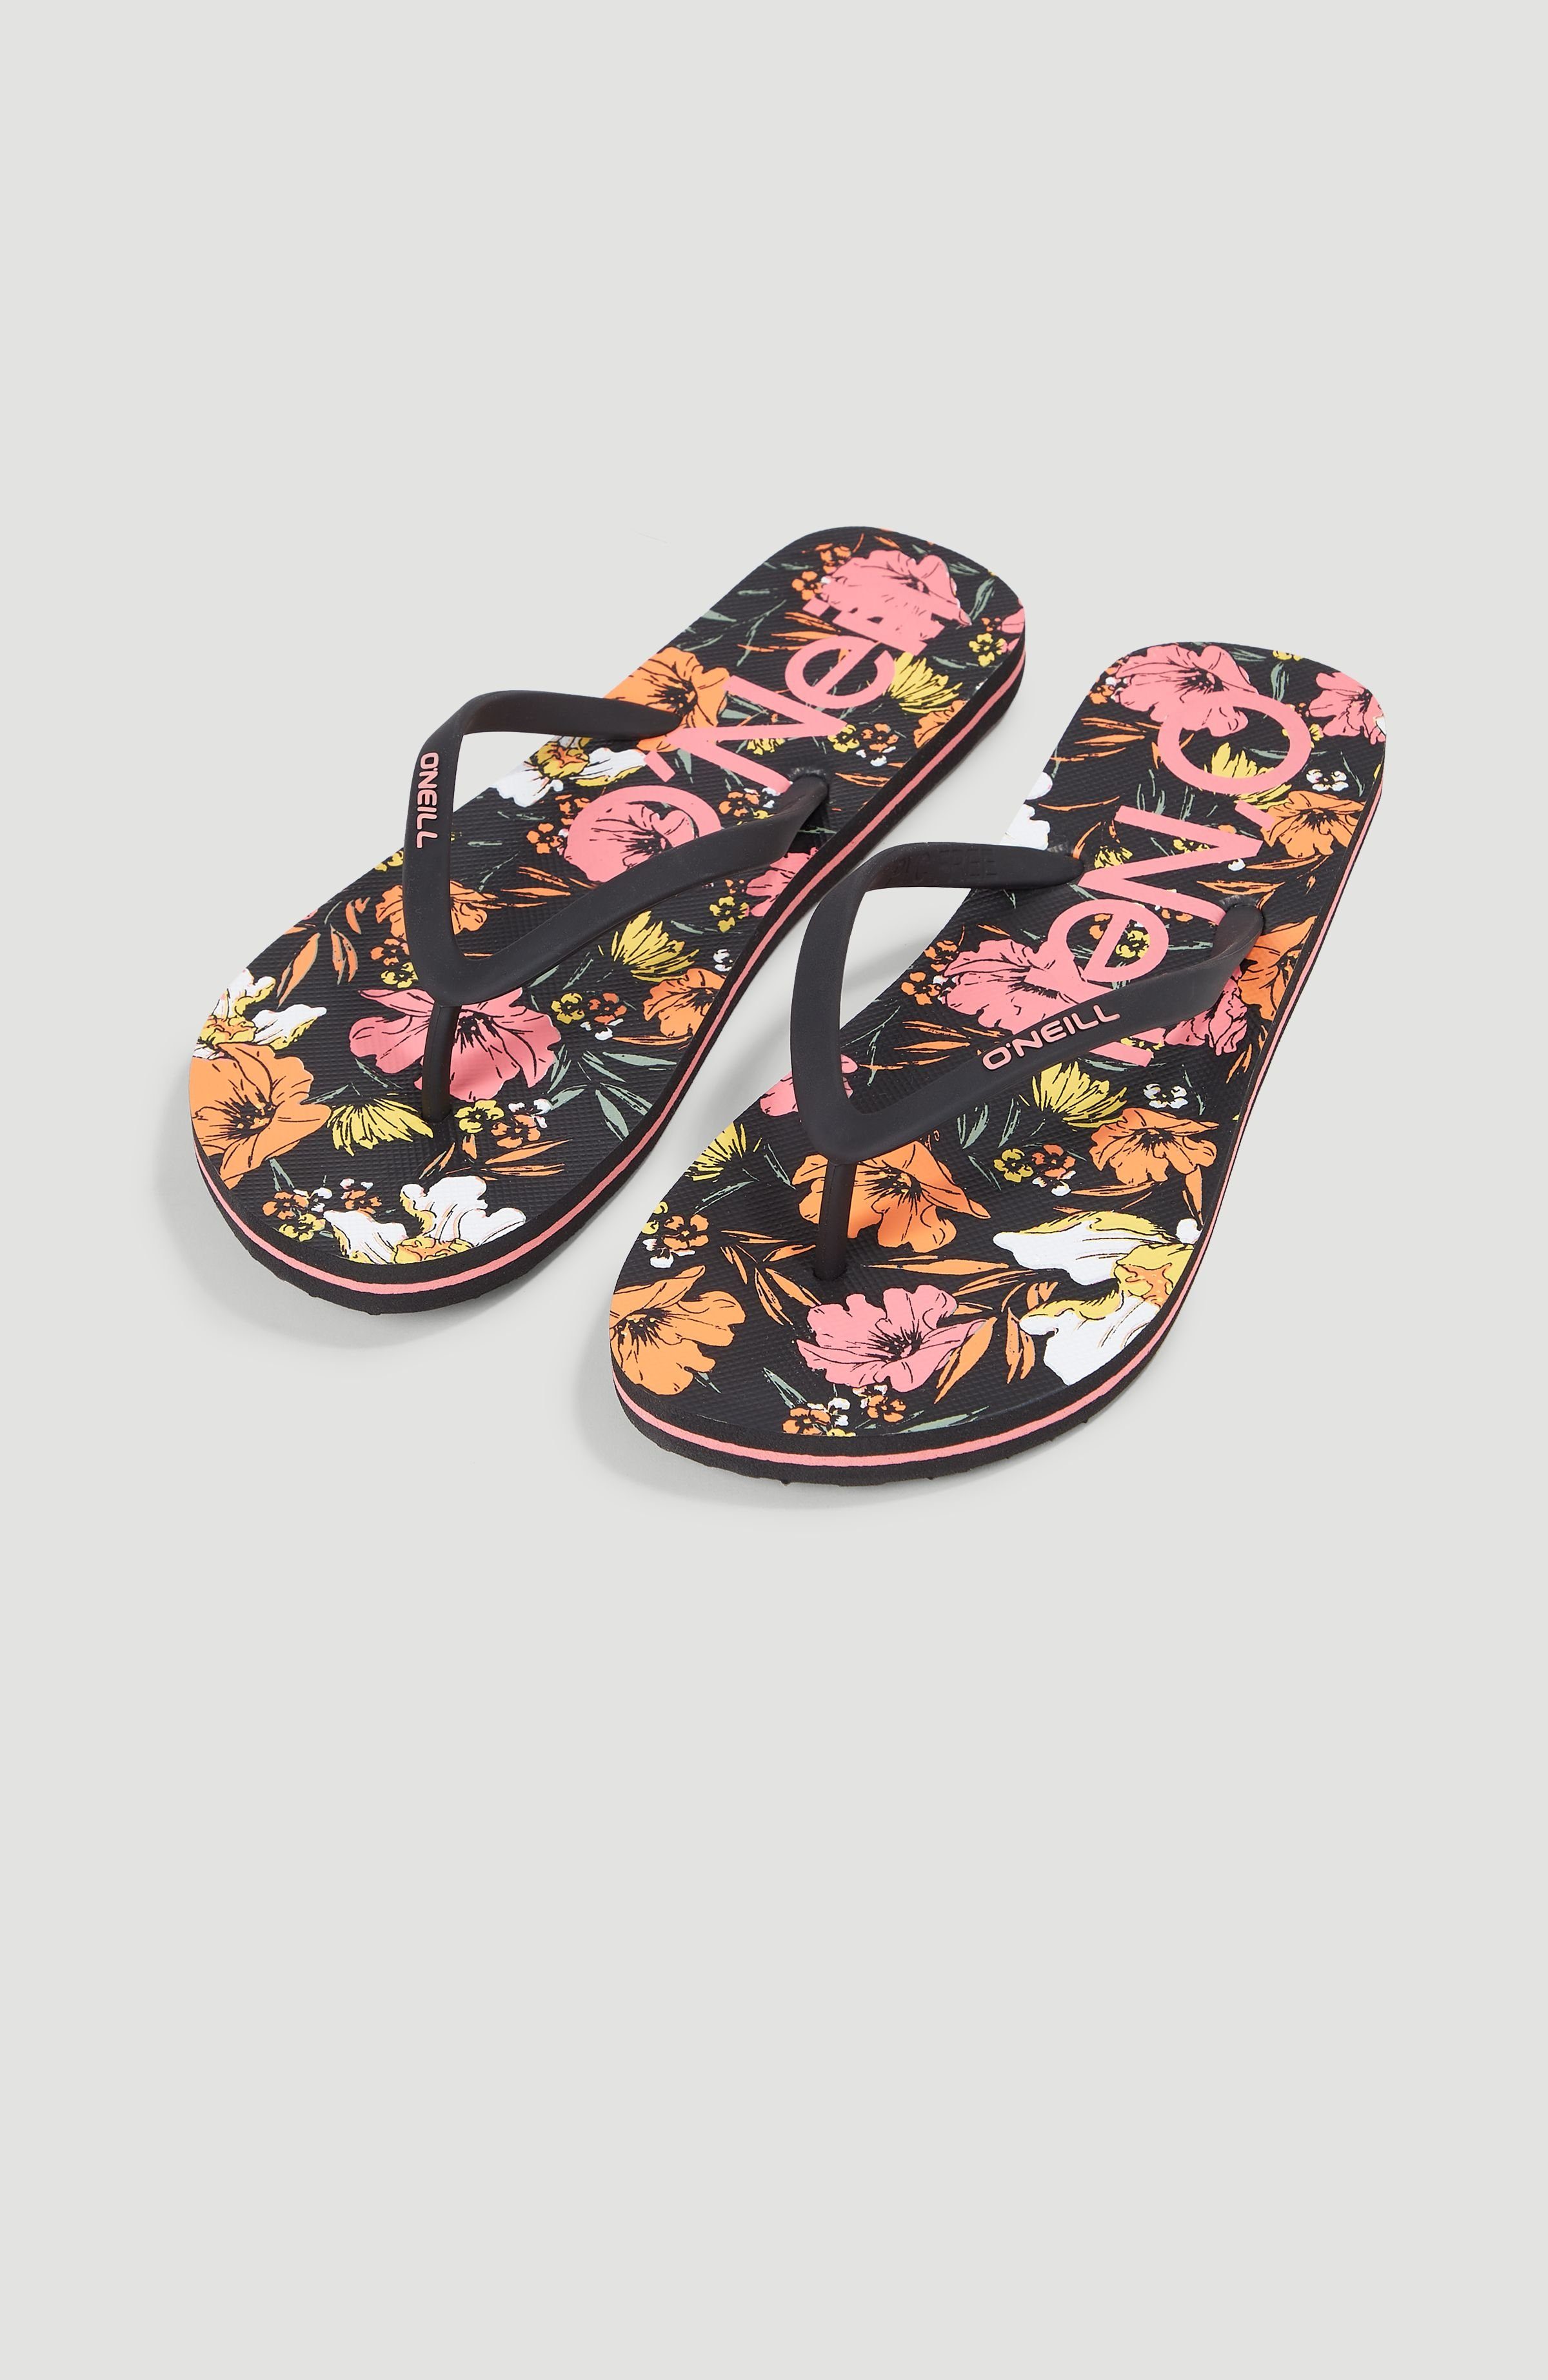 O'Neill PROFILE GRAPHIC SANDALS Шльопанці